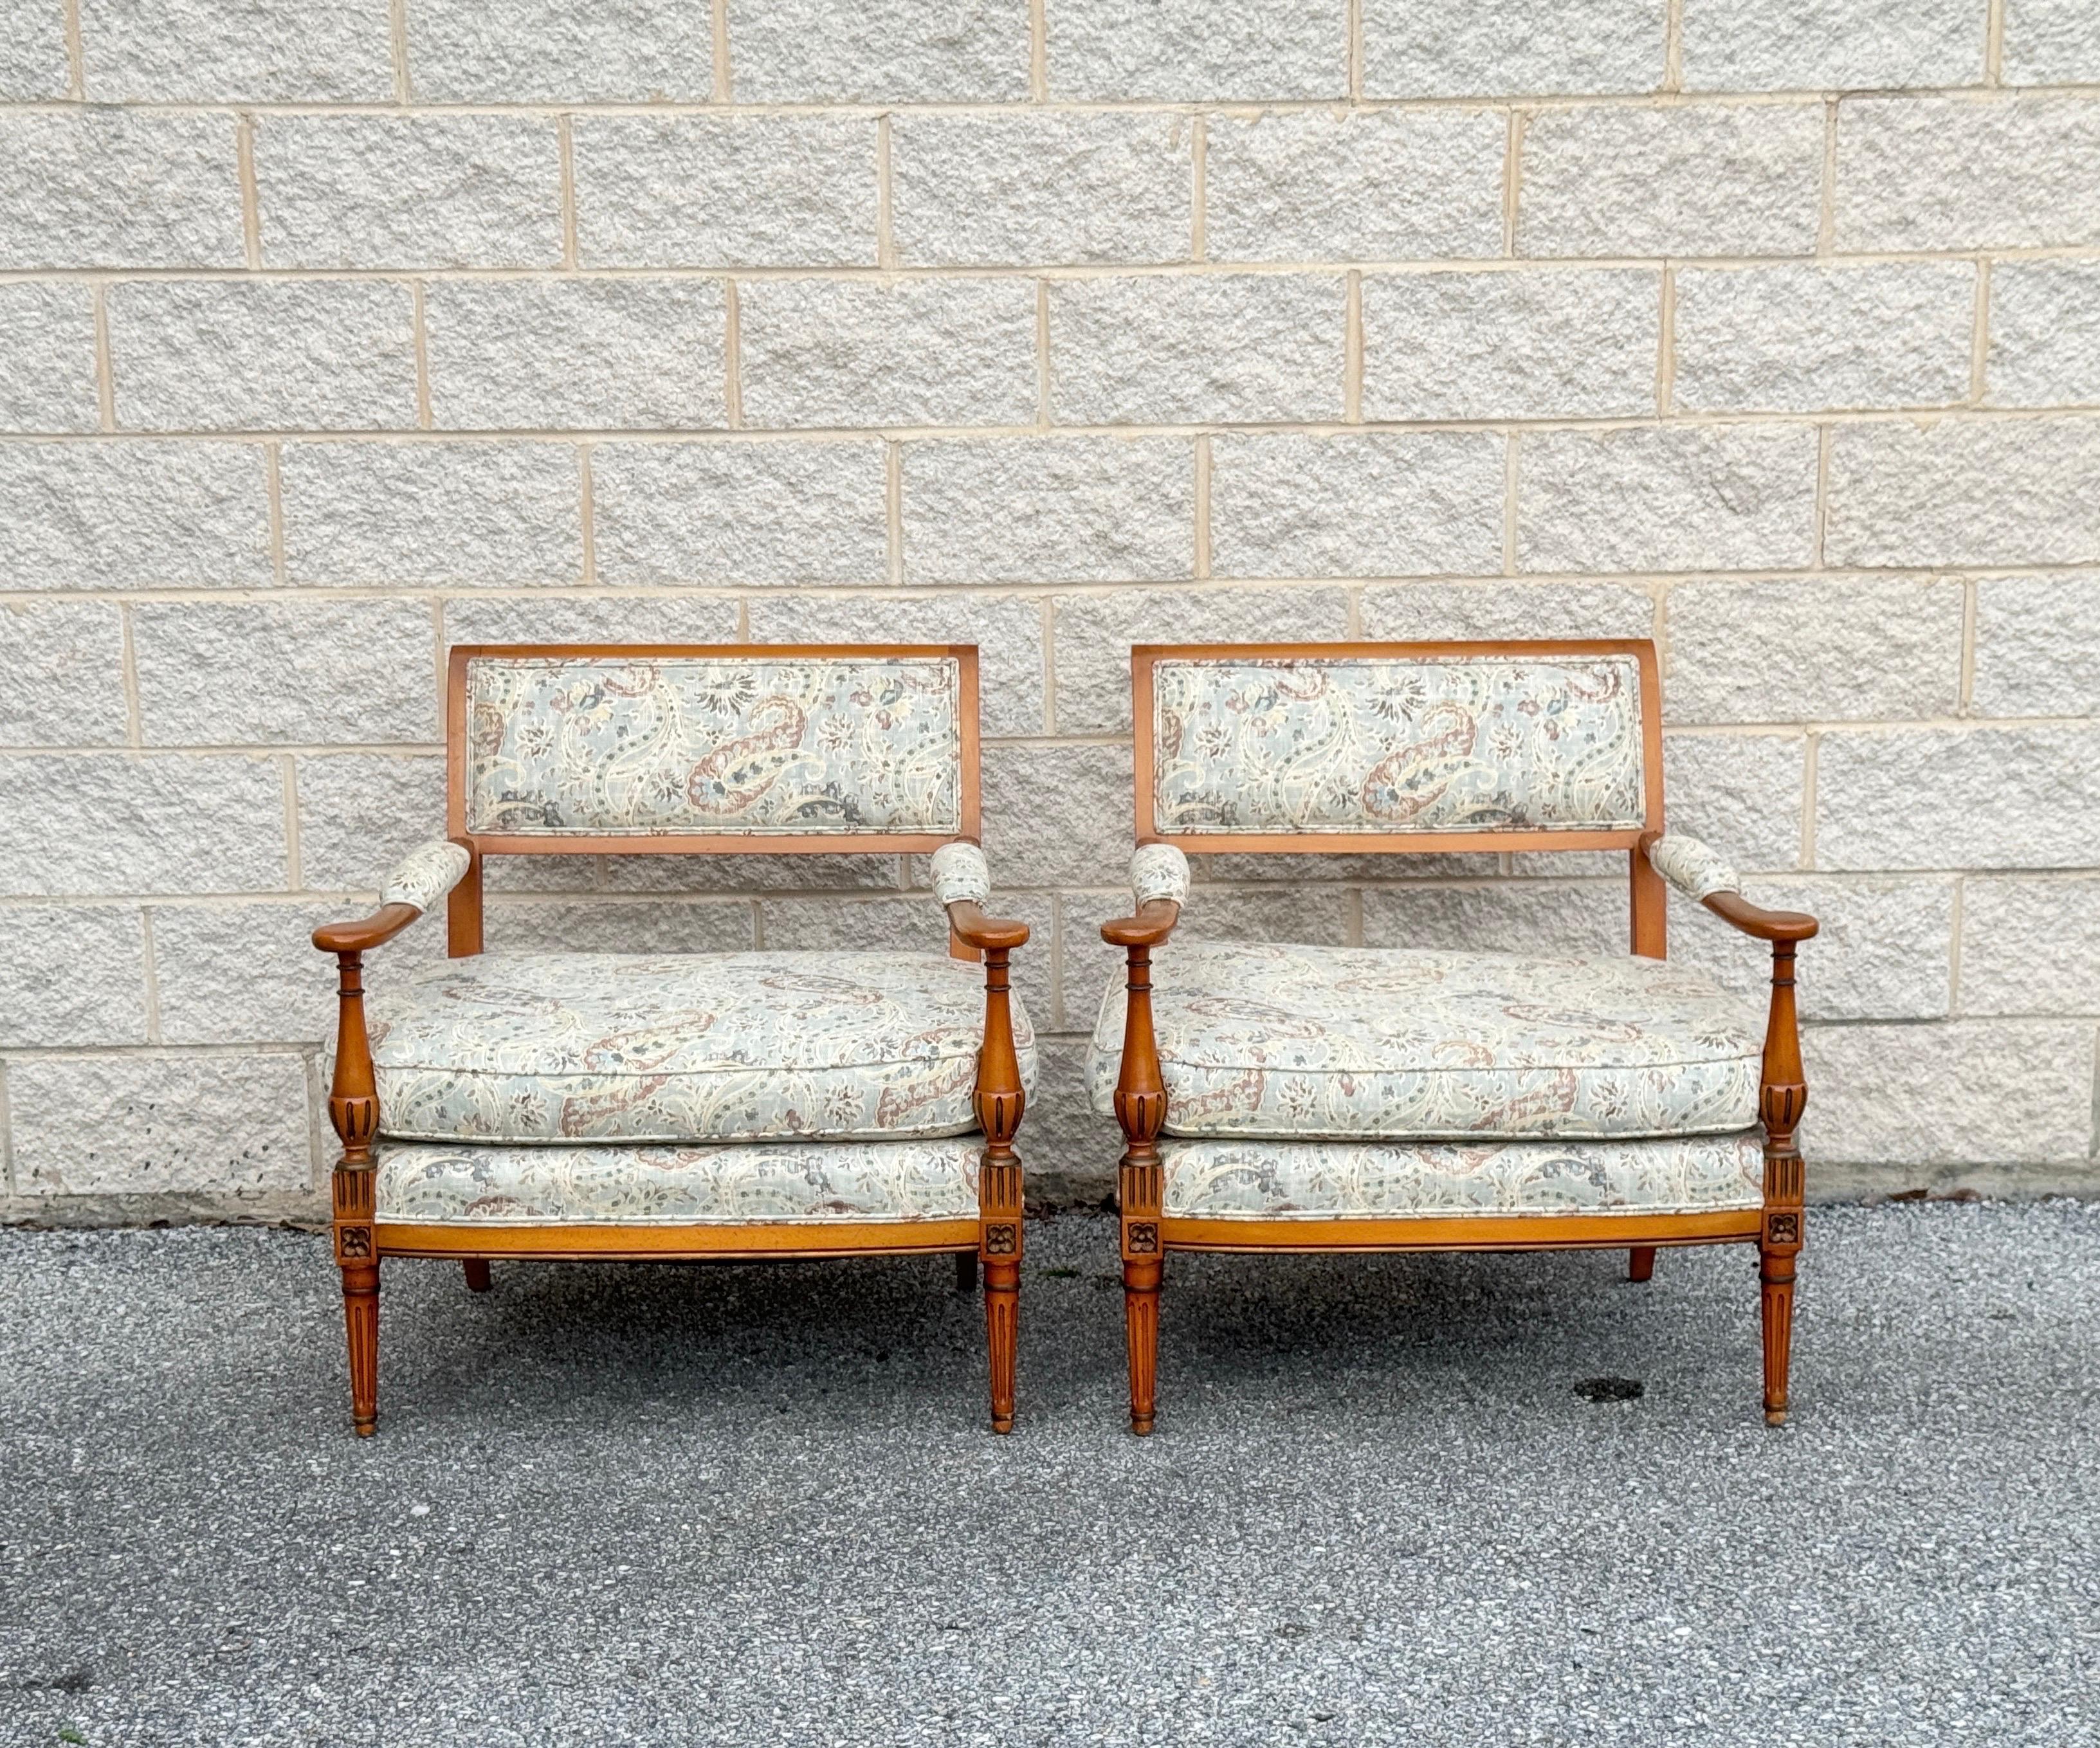 Pair of Louis XVI style Marquis attributed to Grosfeld House.

